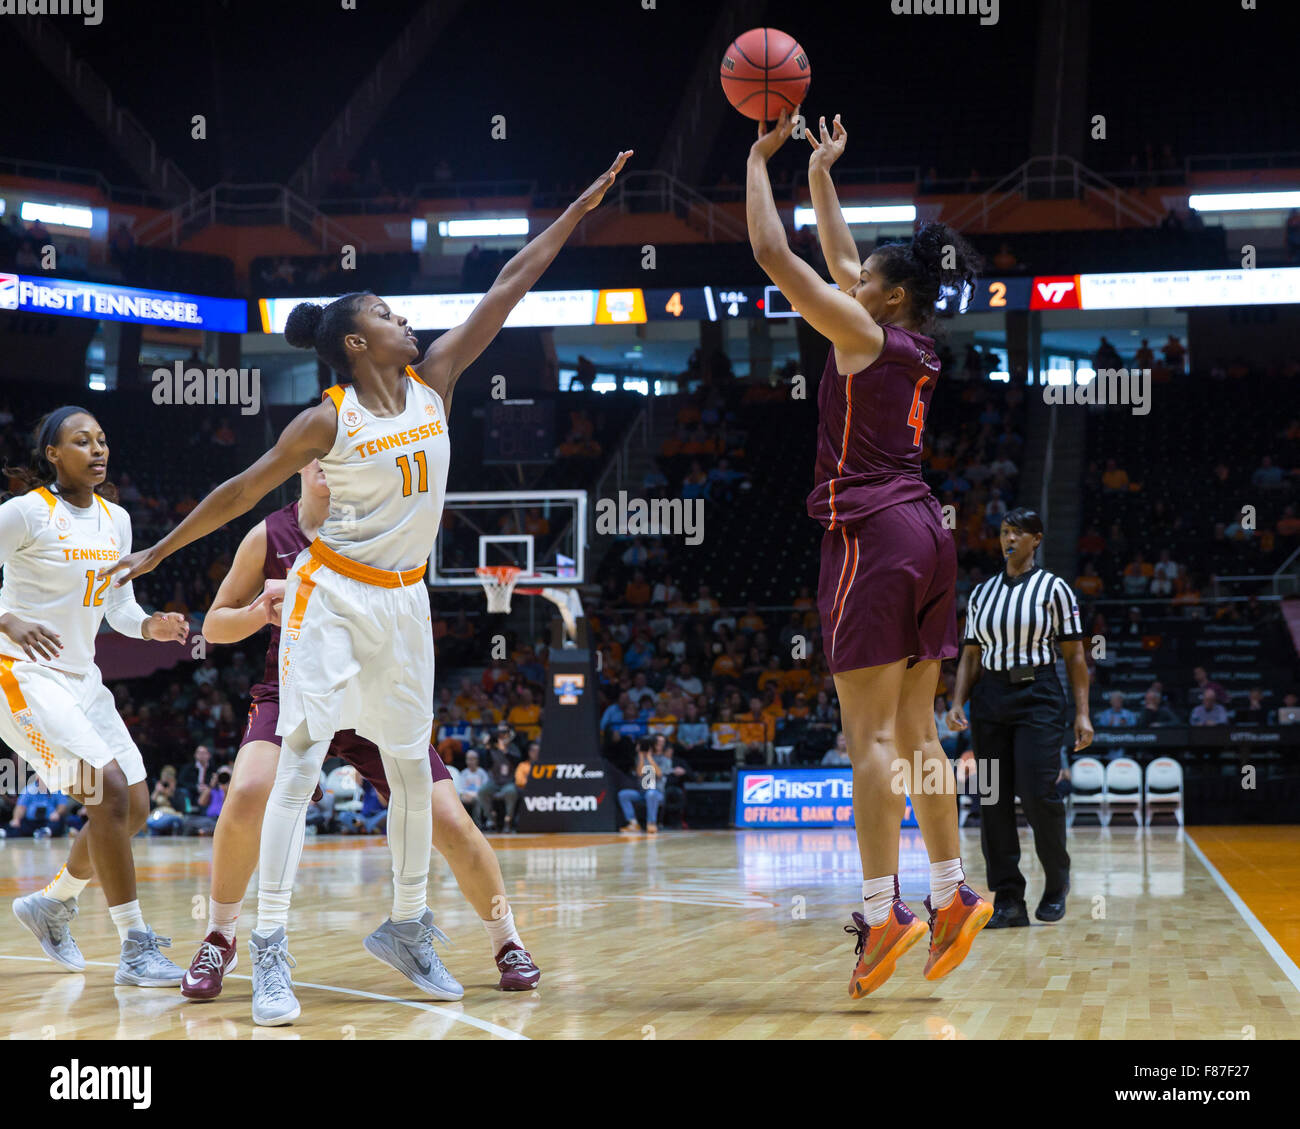 December 6, 2015: Hannah Young #4 of the Virginia Tech Hokies shoots the ball over Diamond DeShields #11 of the Tennessee Lady Volunteers during the NCAA basketball game between the University of Tennessee Lady Volunteers and the Virginia Tech Hokies at Thompson Boling Arena in Knoxville TN Tim Gangloff/CSM Stock Photo